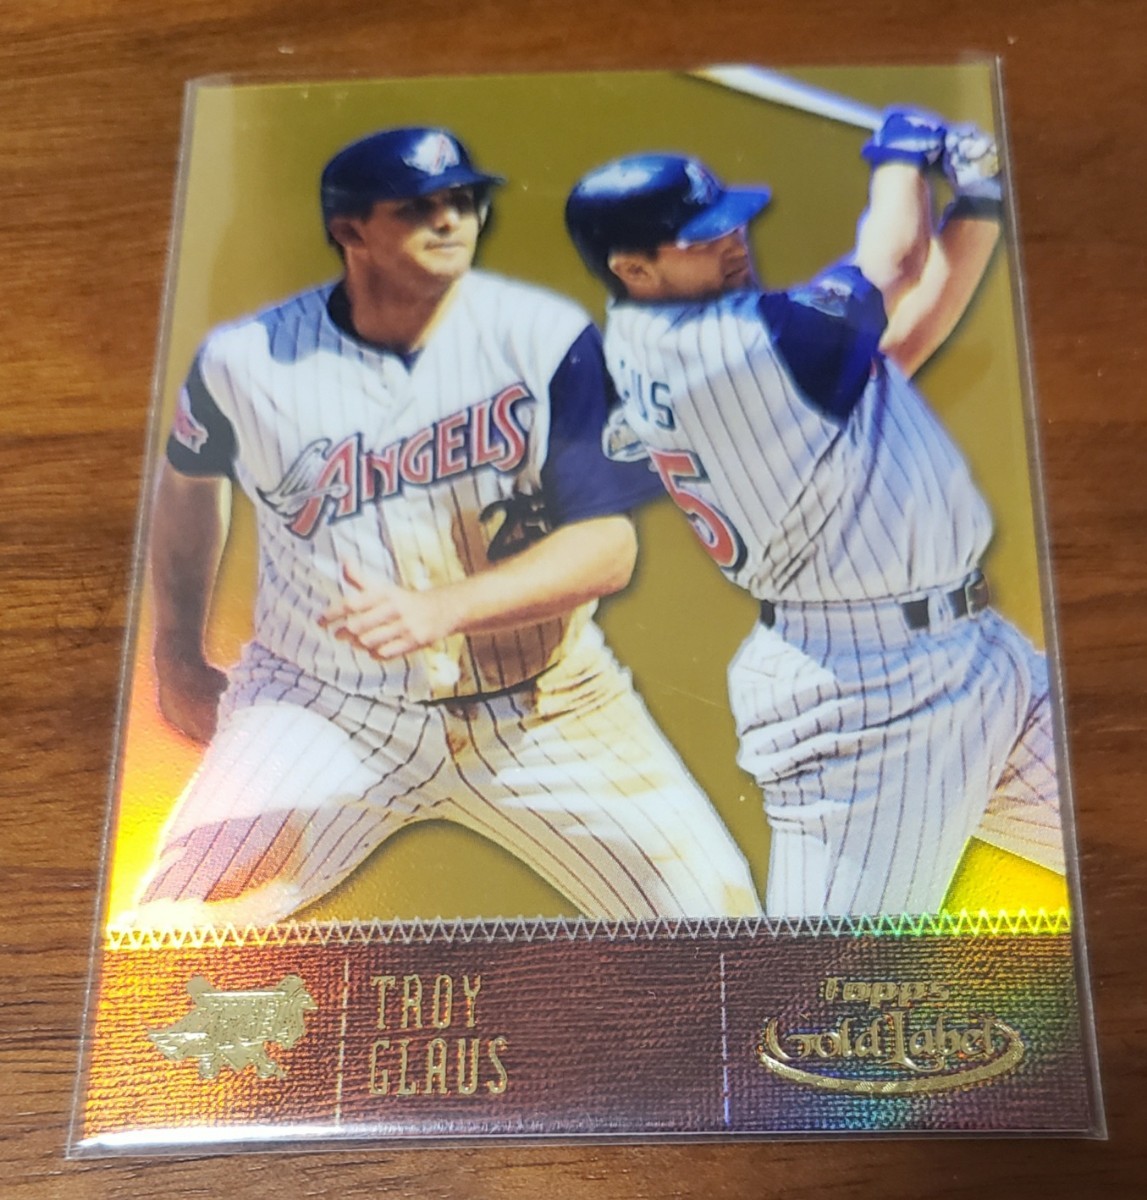 Troy Glaus 2001 Topps Gold Label Class 3 Gold #107 299枚限定 046/299 シリアルナンバー 入り MLB カード　同梱可_画像2